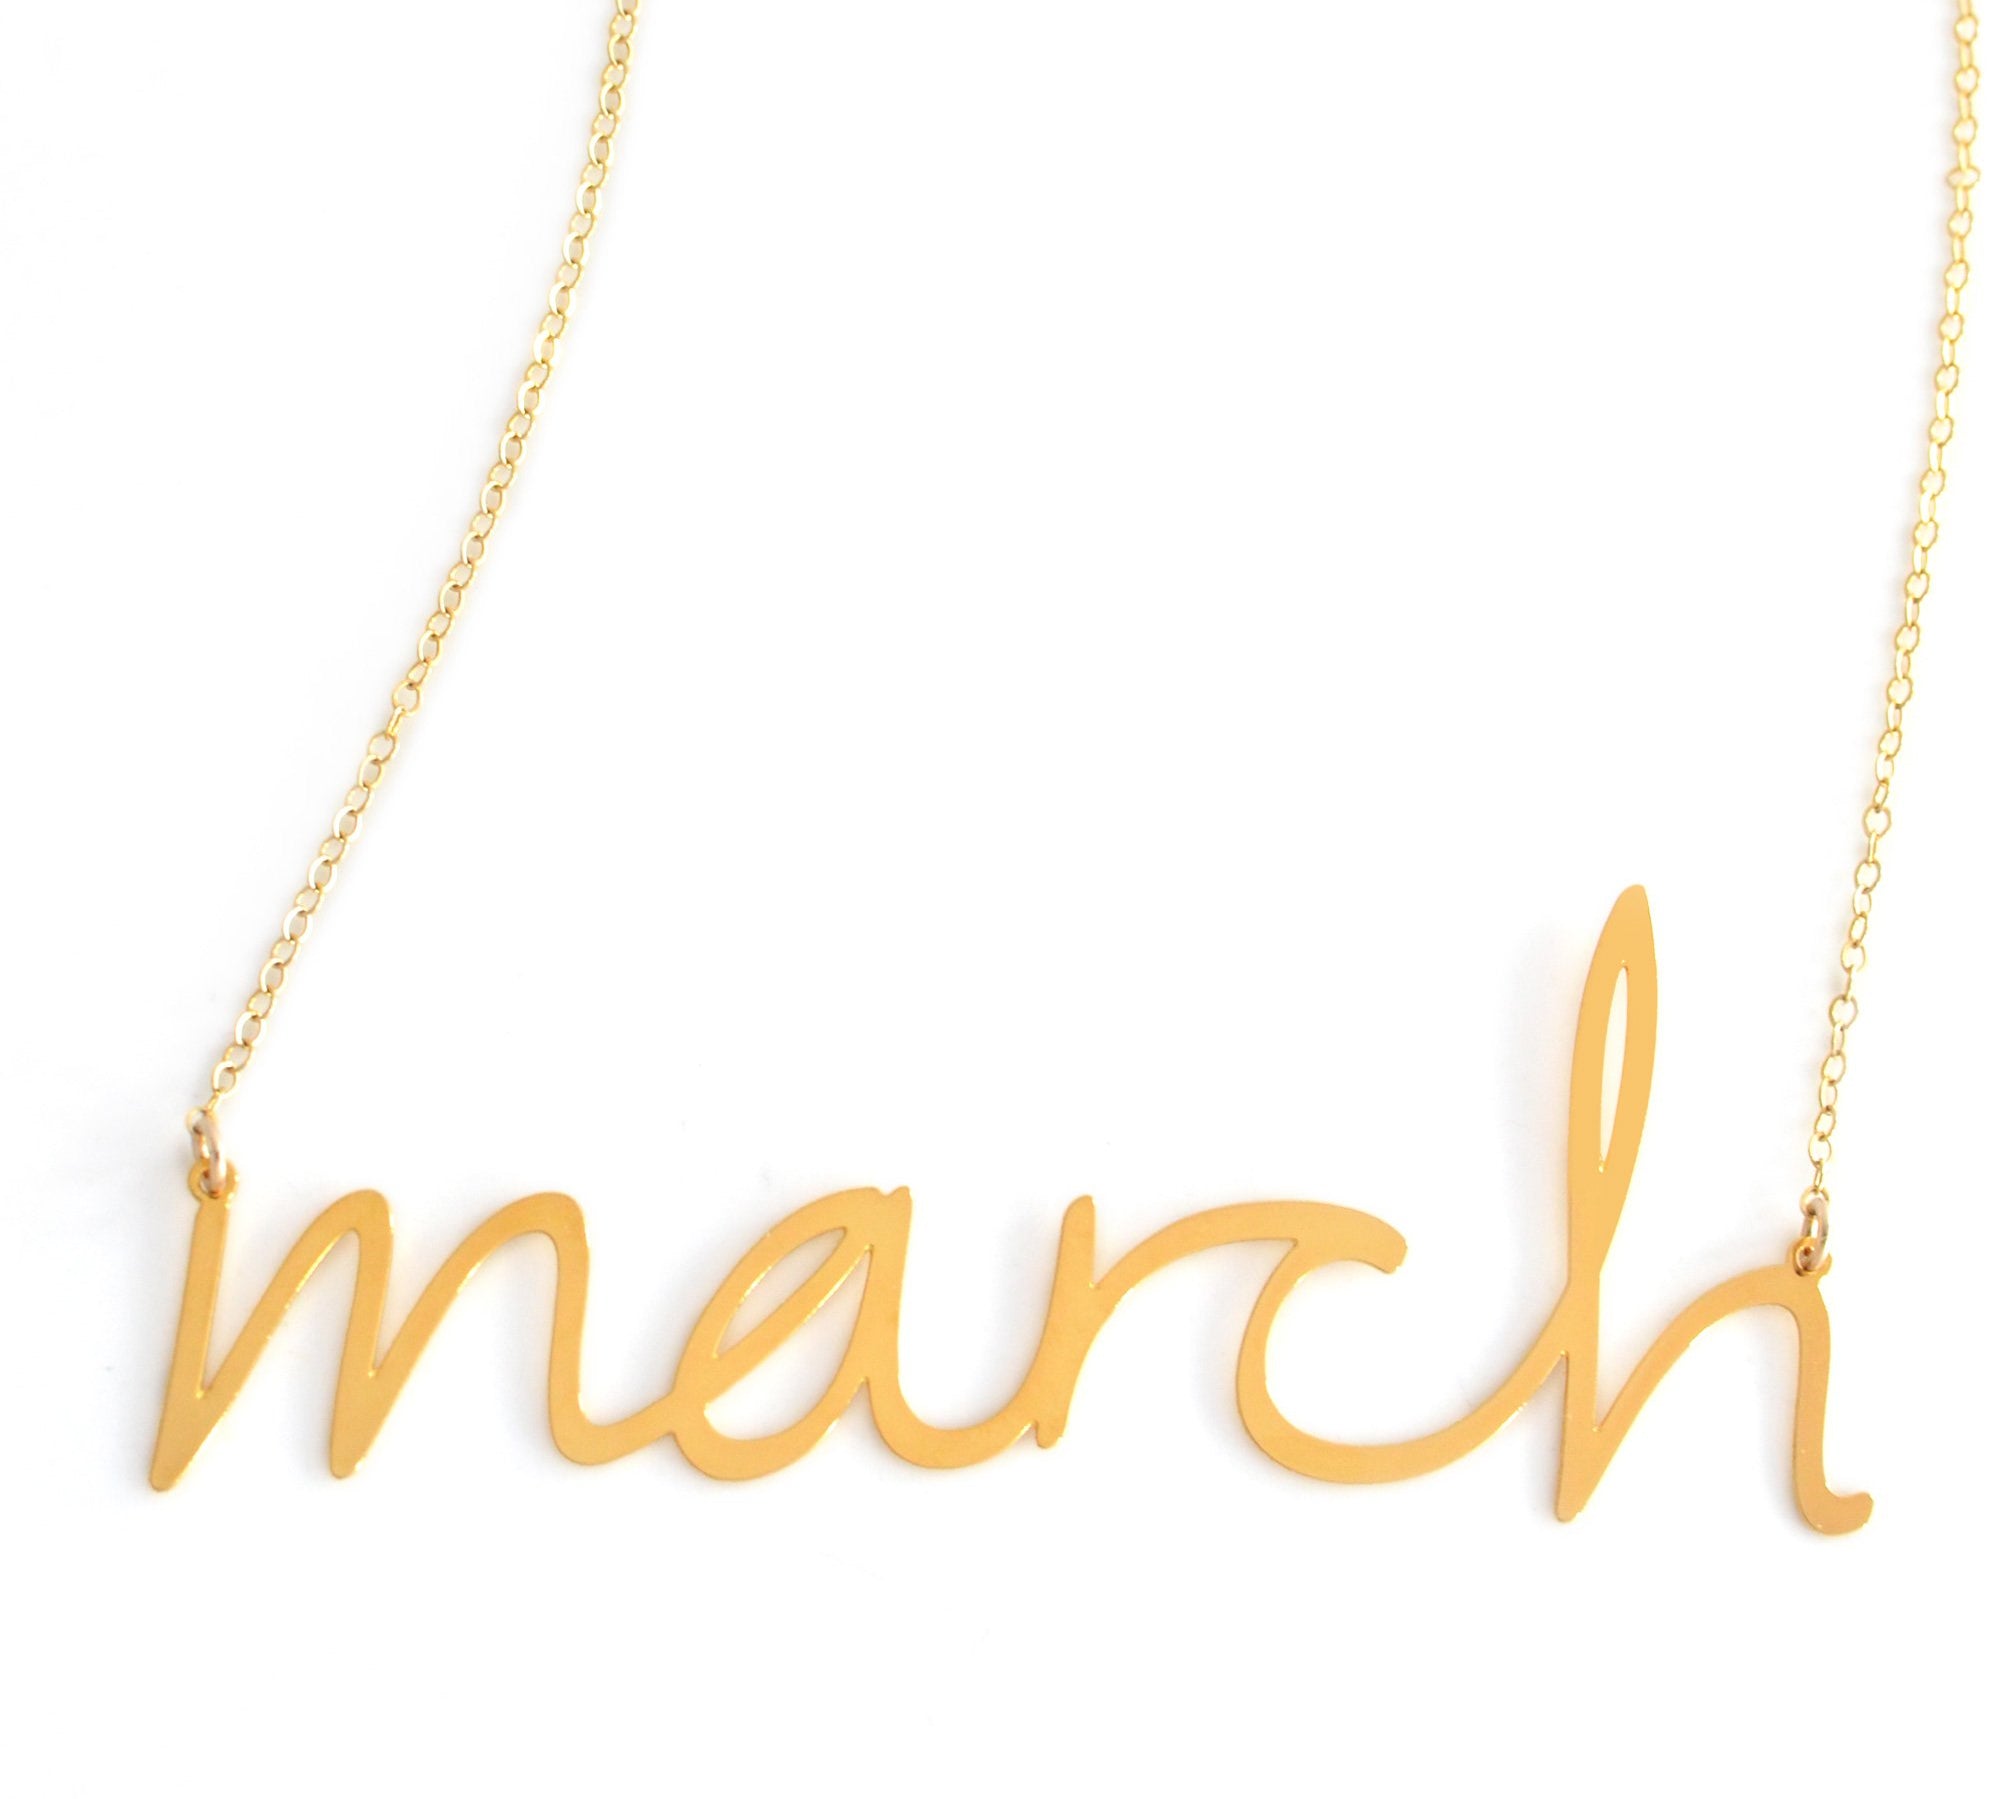 March Necklace - High Quality, Affordable, Hand Written, Empowering, Self Love, Mantra Word Necklace - Available in Gold and Silver - Small and Large Sizes - Made in USA - Brevity Jewelry